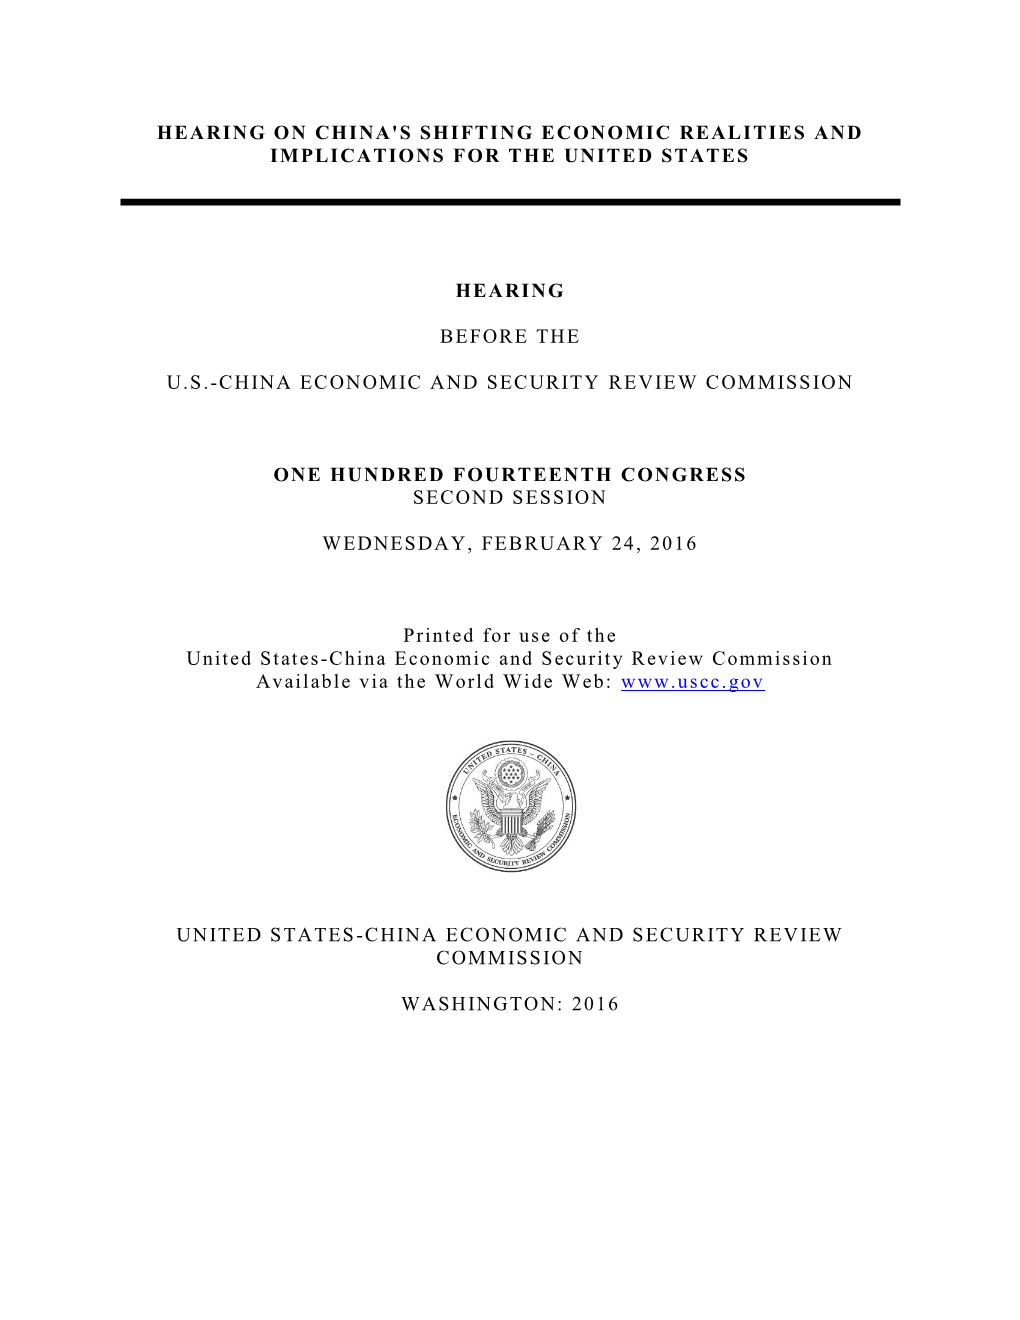 Hearing on China's Shifting Economic Realities and Implications for the United States Hearing Before the U.S.-China Economic An